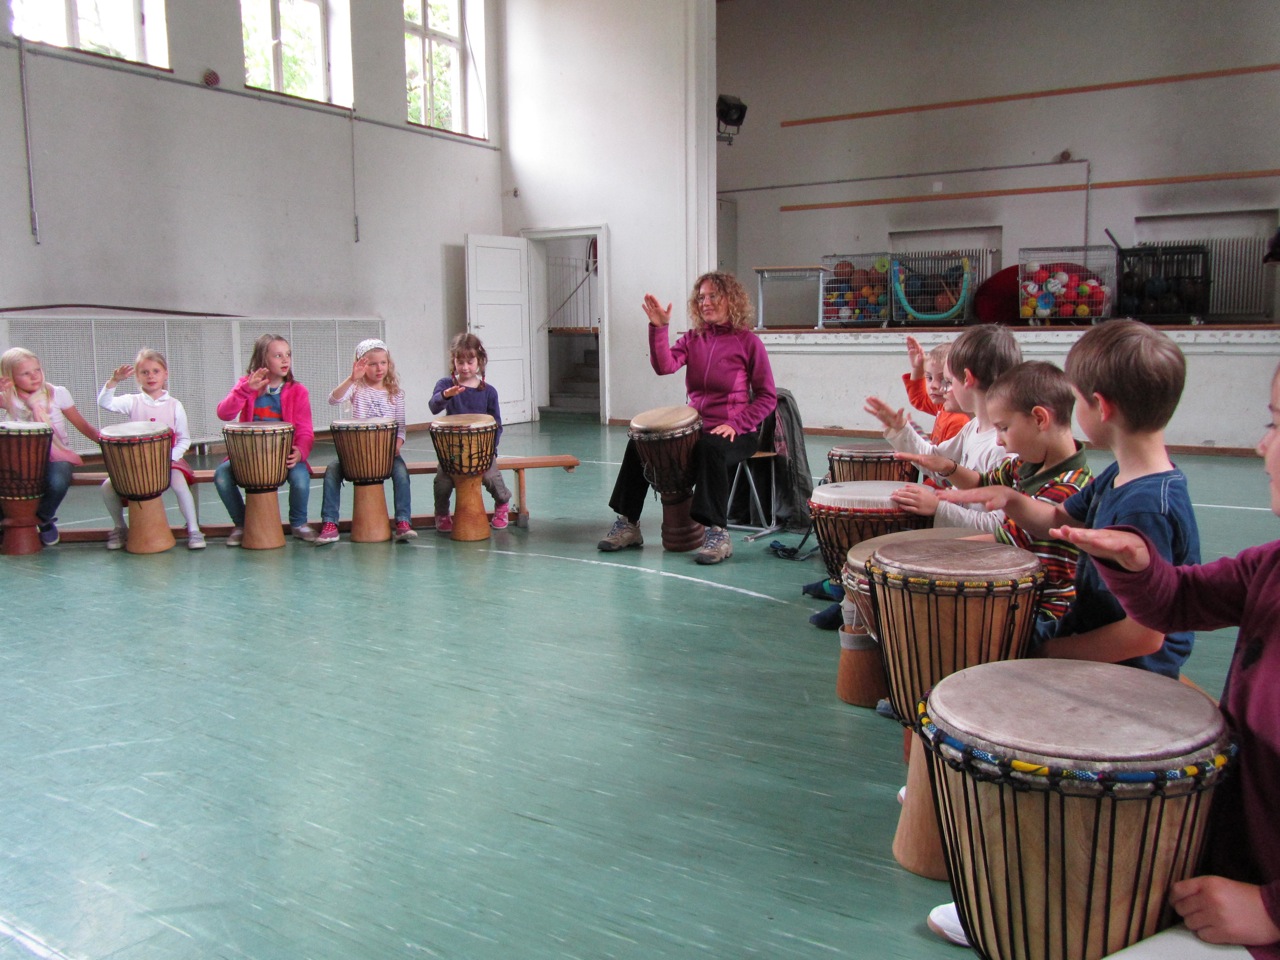 Drumming to the African Beat